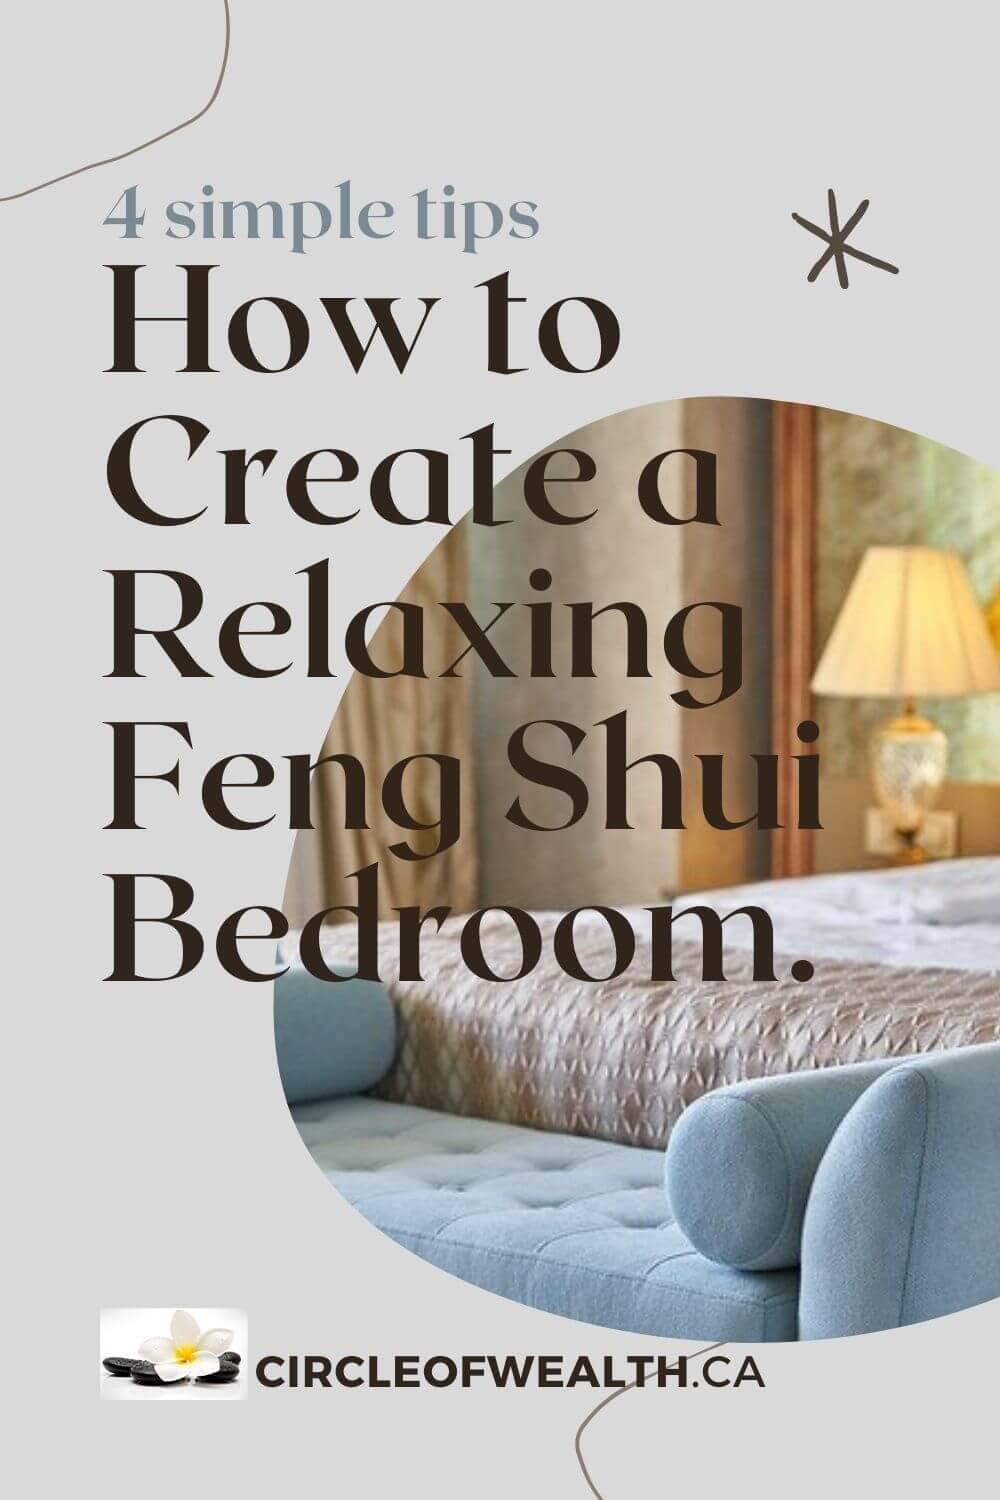 relaxing feng shui Bedrooms the Ultimate guide